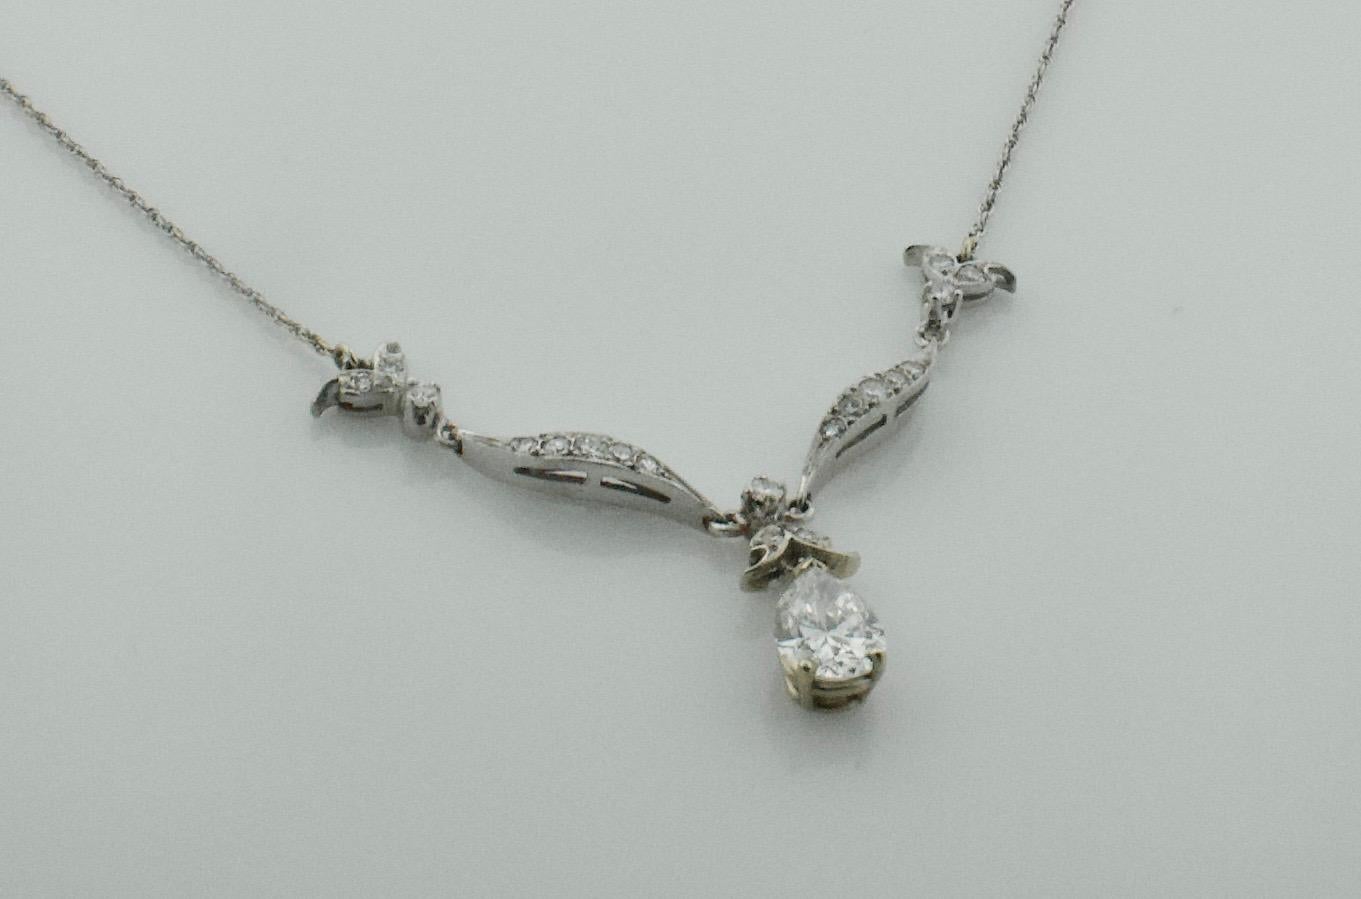 Diamond Dangling Pear Shape Necklace in Platinum on 14k Chain c. 1950's
One Pear Shape Diamond Weighing 1.21 GIA Certified G I1 [bright with no imperfections visible to the naked eye]
Seventeen Round Cut Diamonds weighing .45 carats approximately